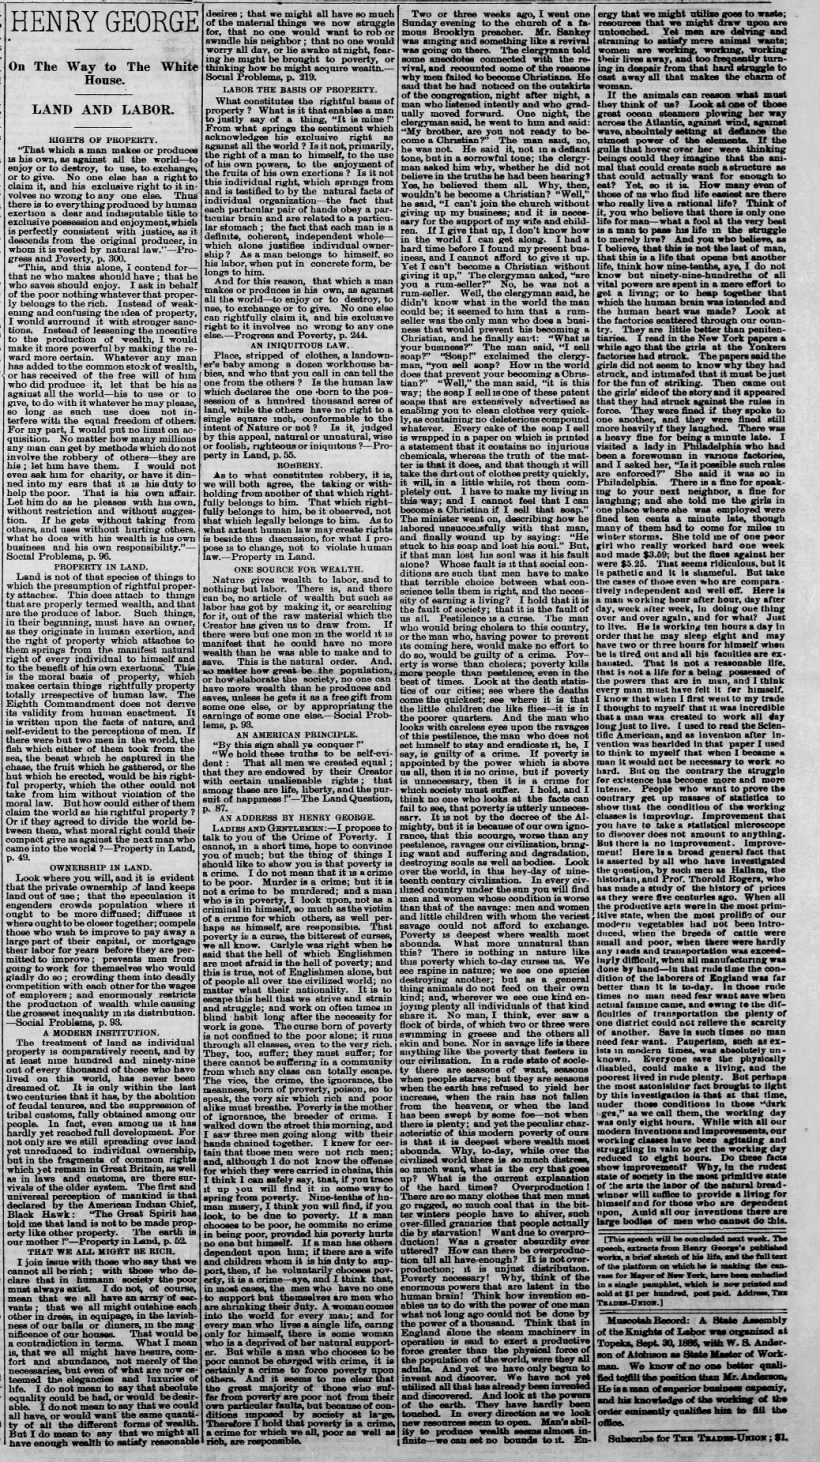 1886-10-23 ATCH TU HG On The Way to The White House quotes and TCOP at length p1